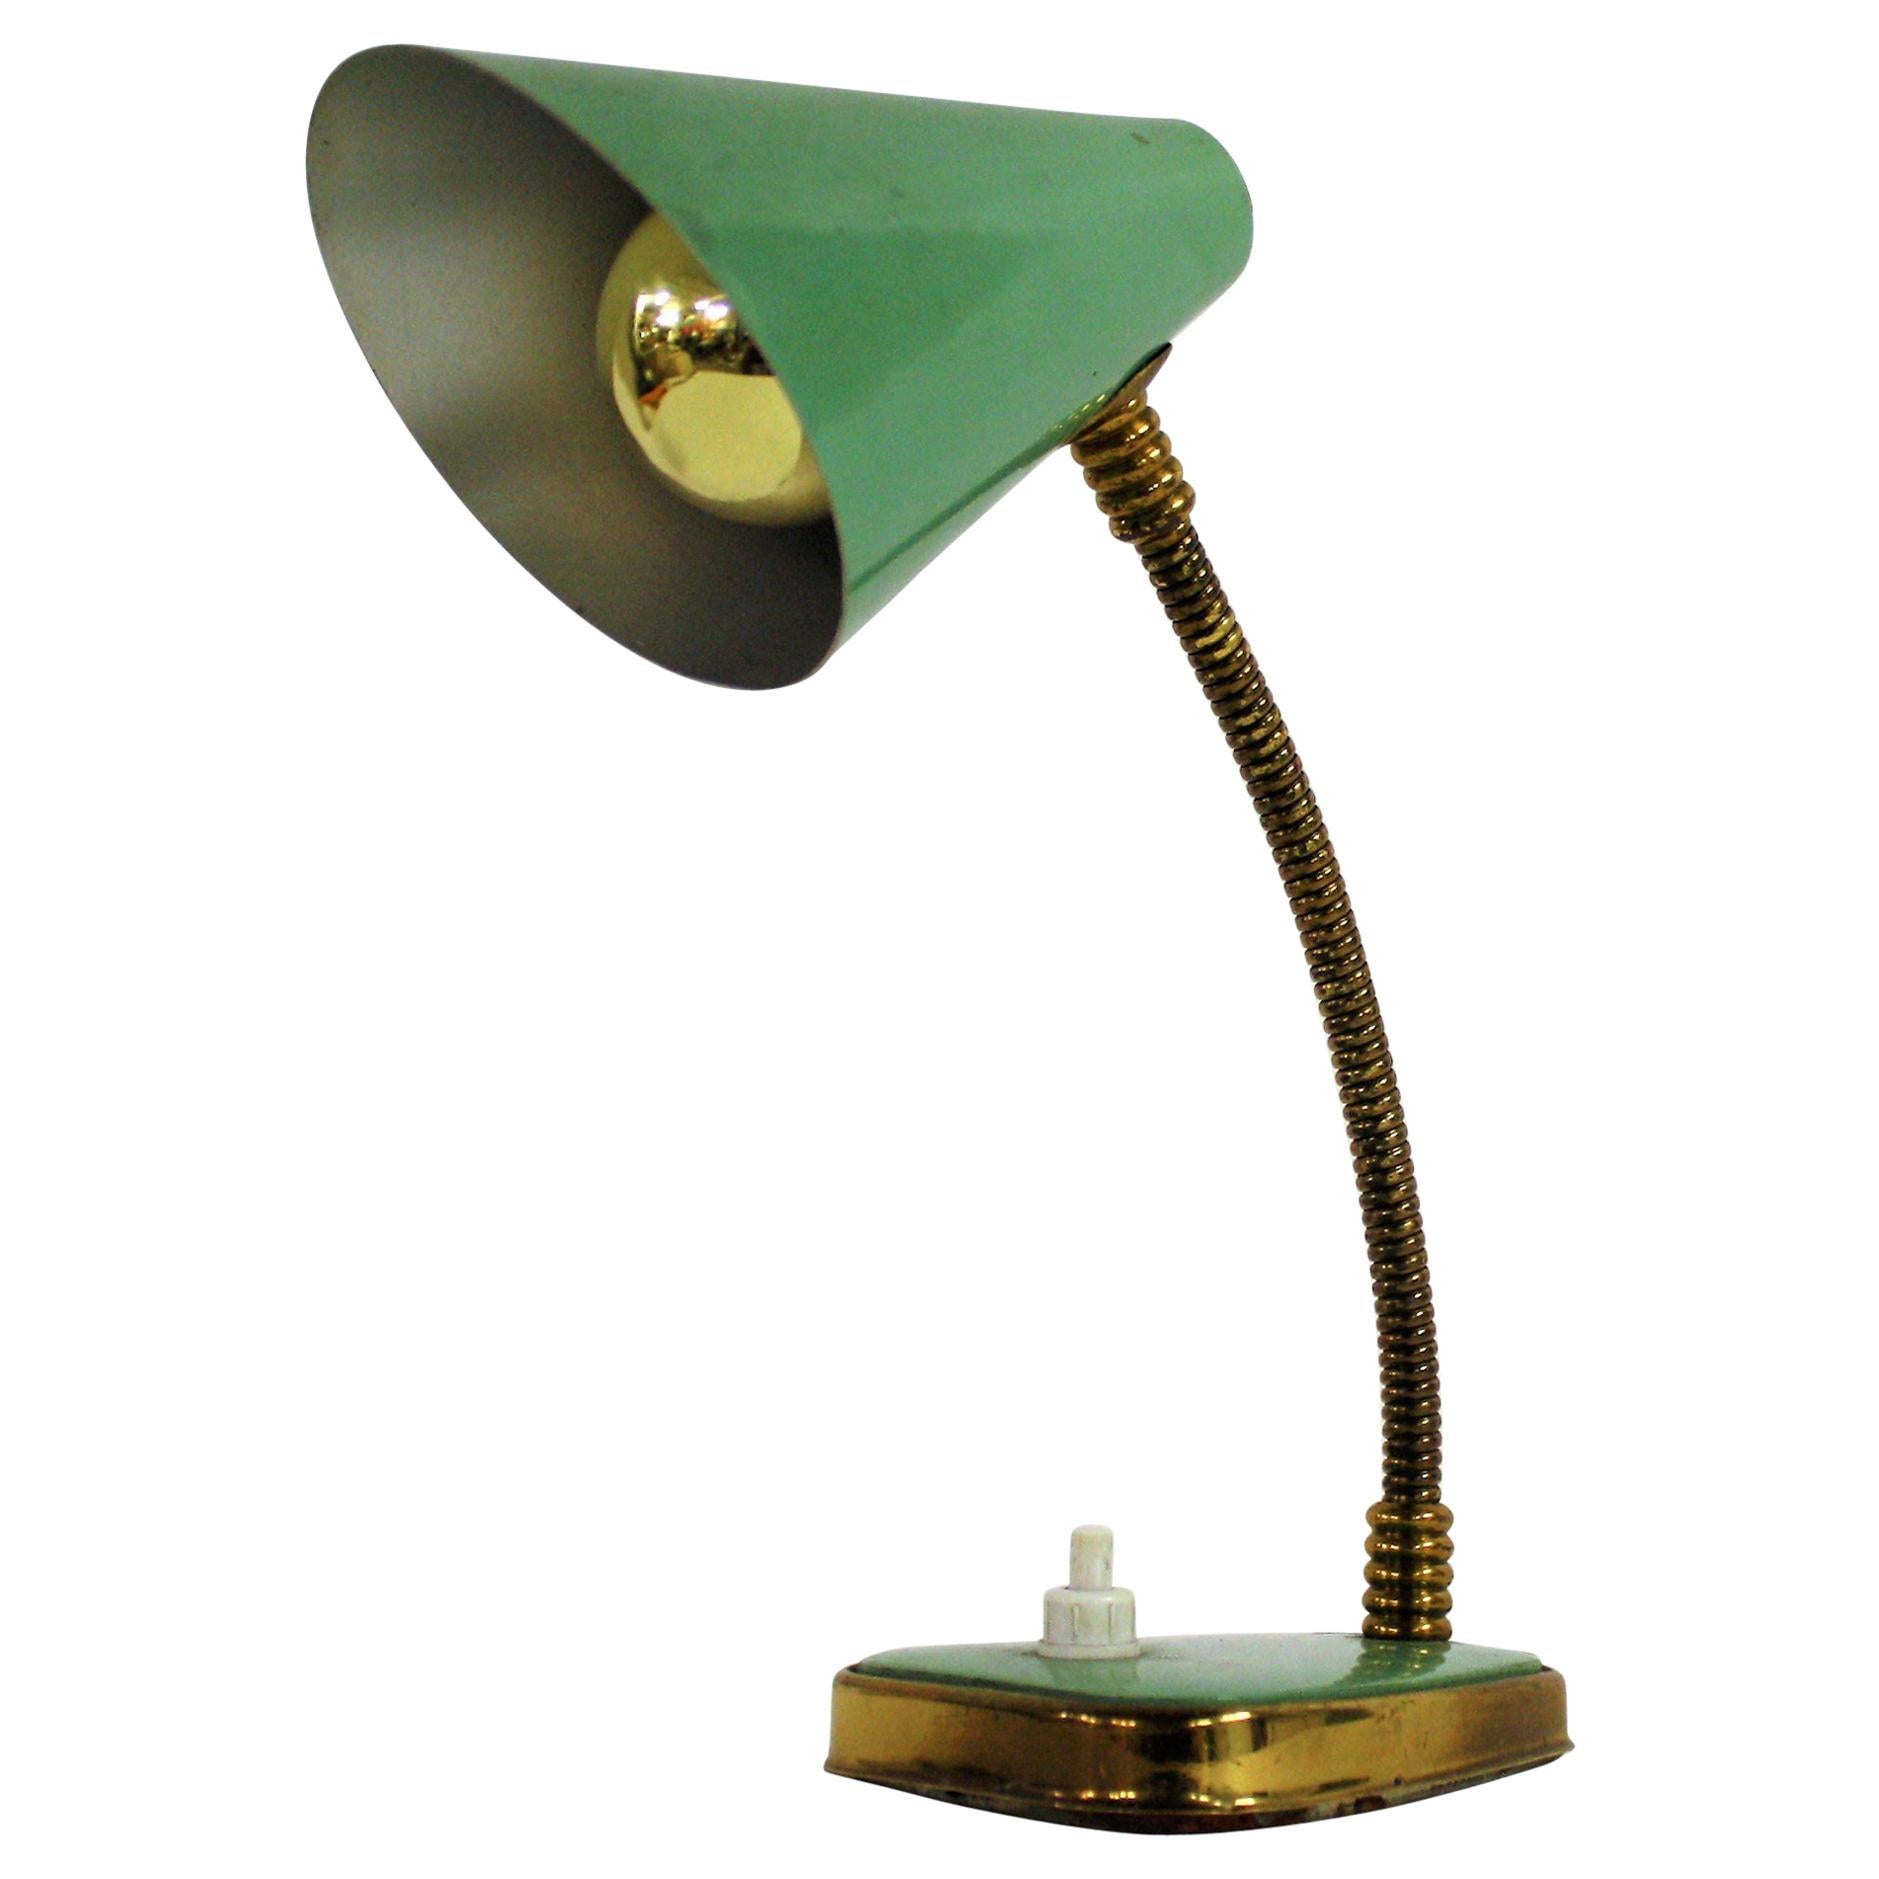 Charming Mid-Century Modern table lamp manufactured by Palma Firenze - Italy

It consists of a fine aluminum lampshade mounted on a flexible brass arm.

The base has a brass finish as well.

The lamp is in a beautiful used condition.

This